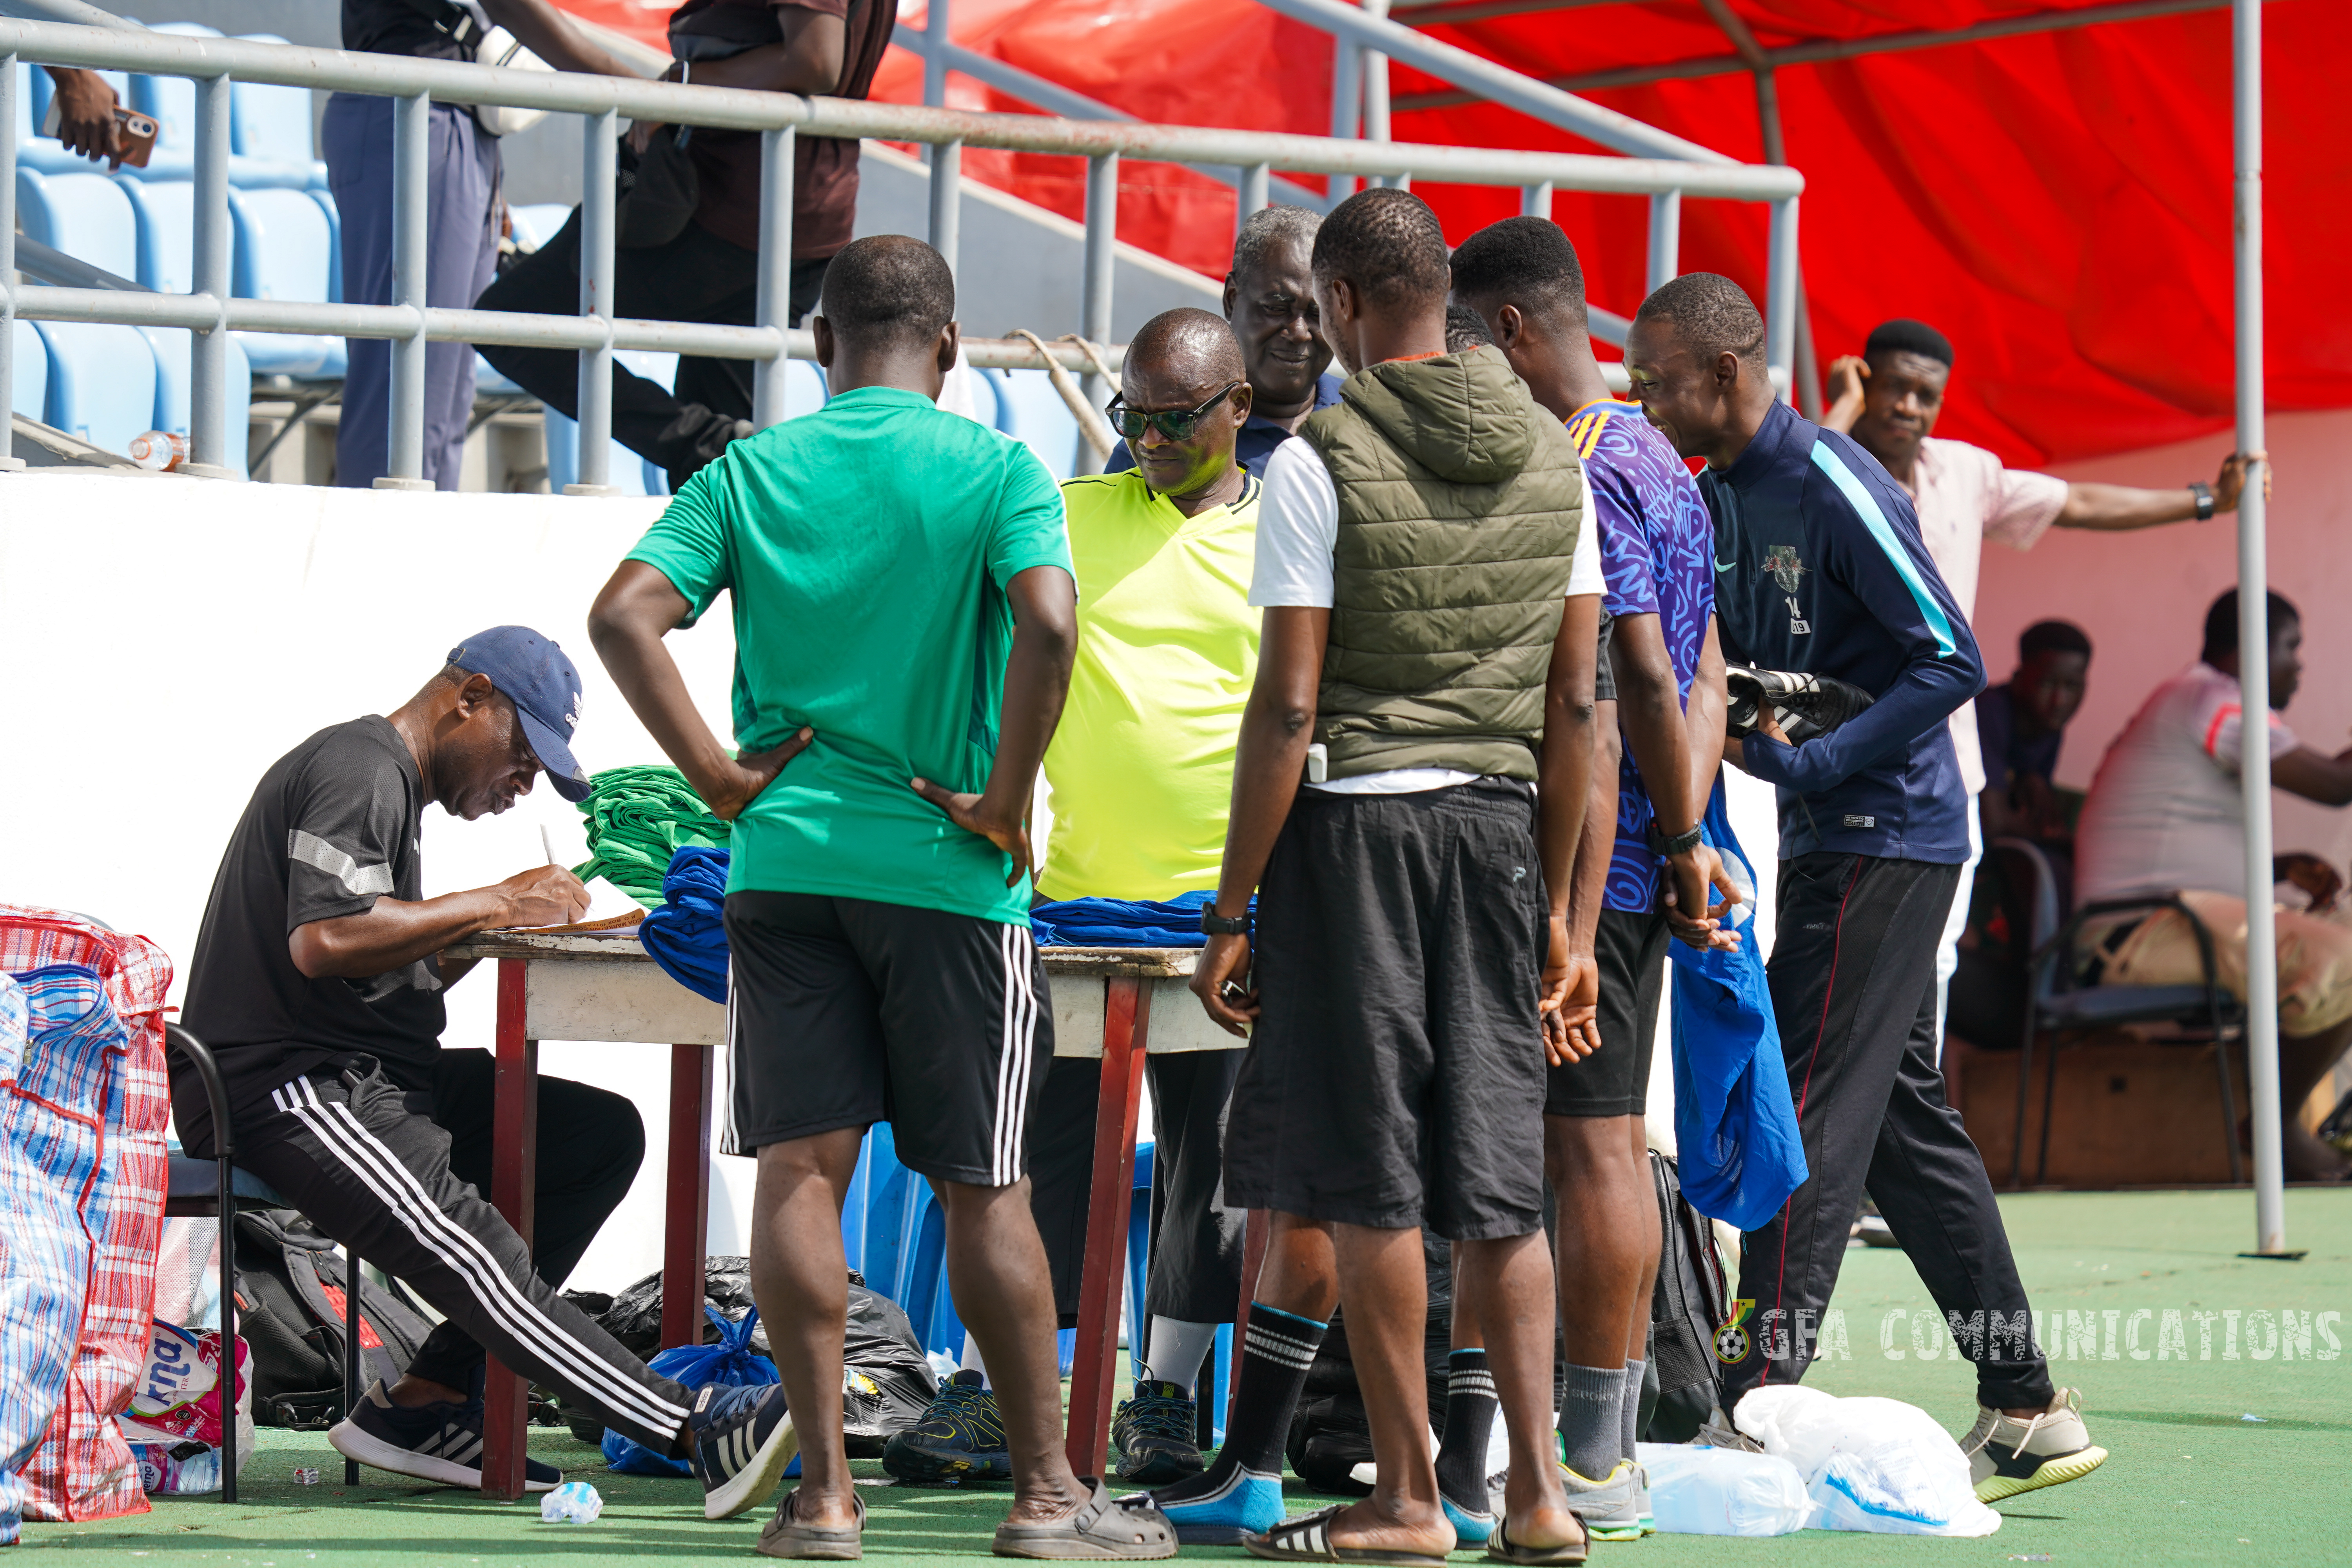 Southern sector referees undergo mandatory fitness test for new season